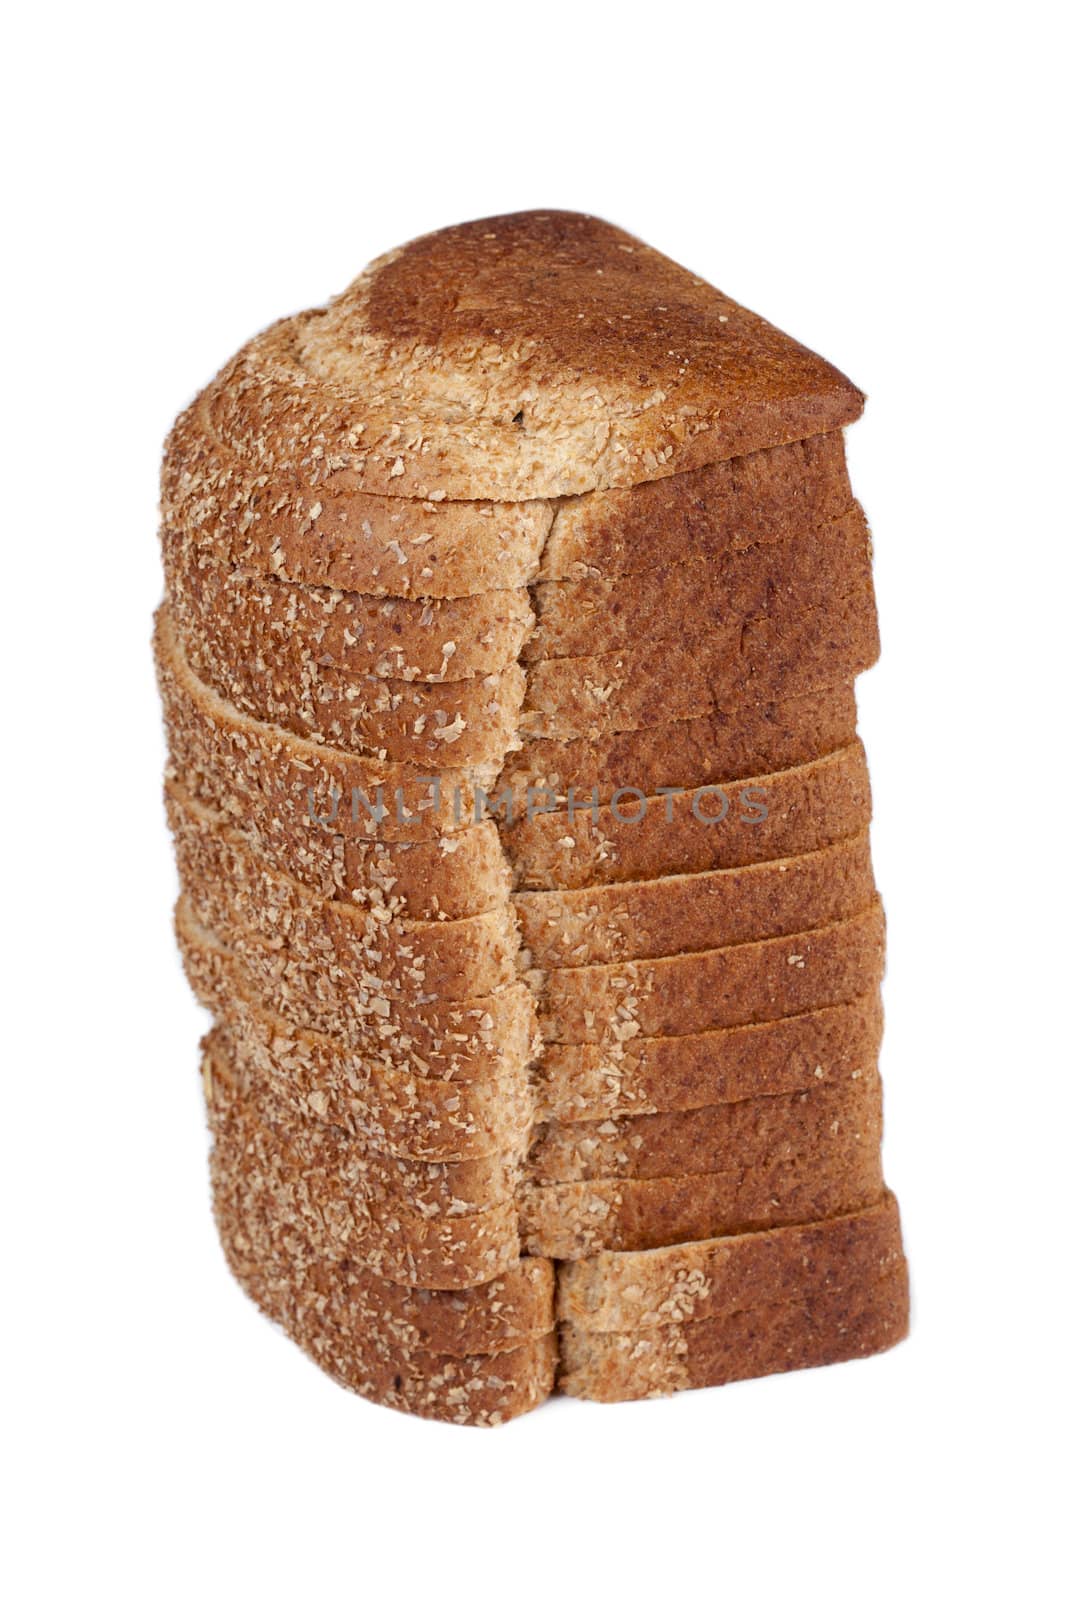 A loaf of bread over the white background